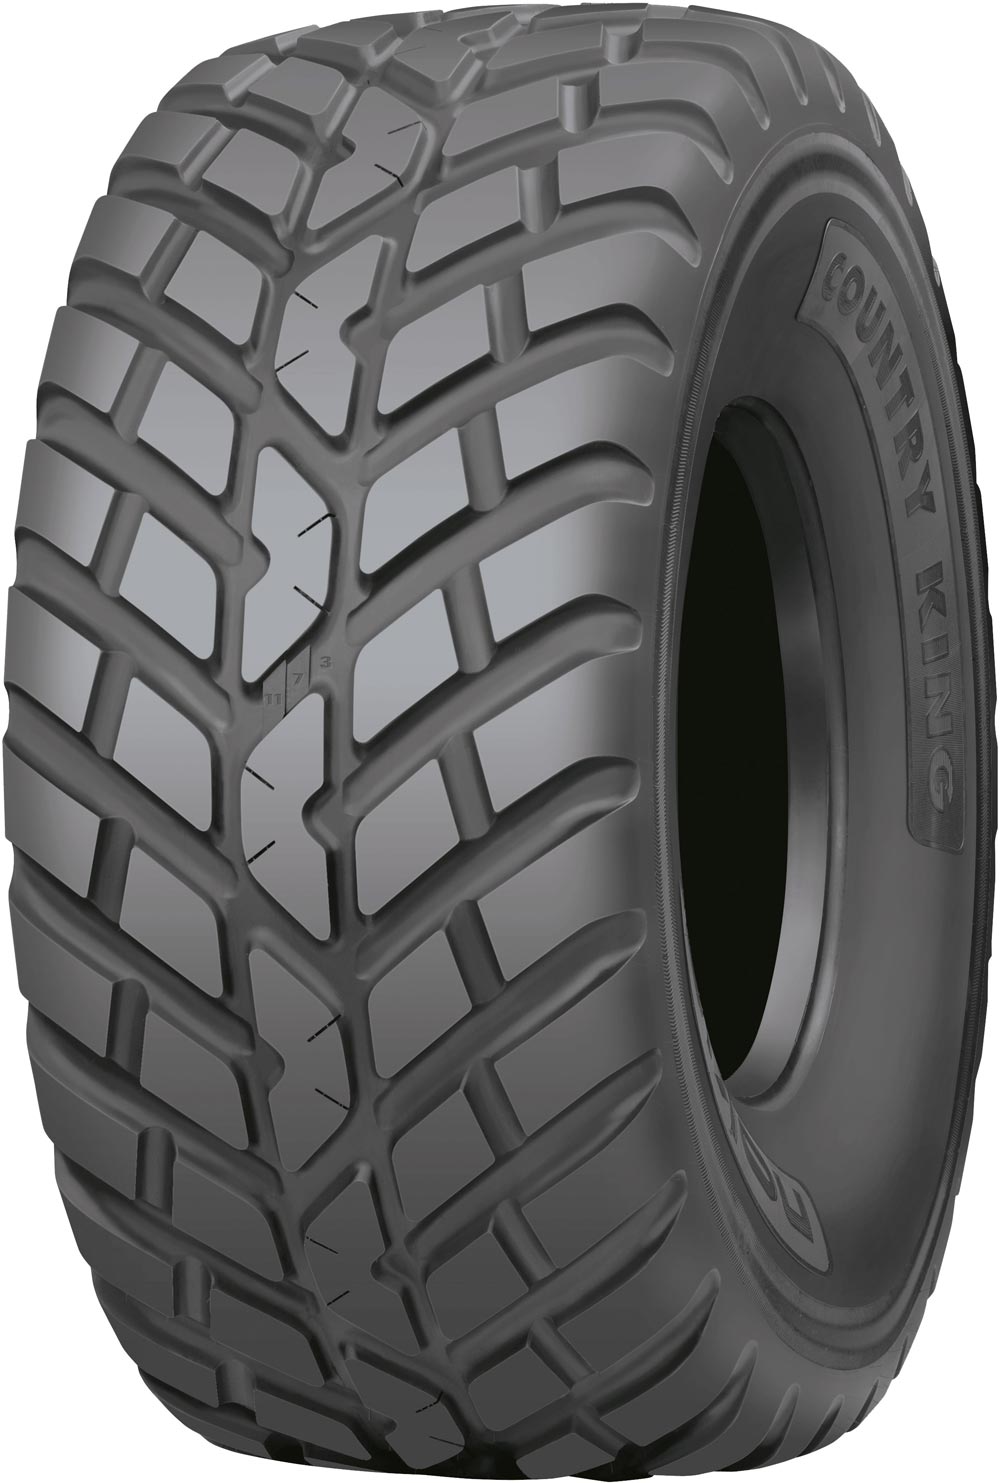 product_type-industrial_tires NOKIAN COUNTRY KING TL 750/60 R30.5 181D